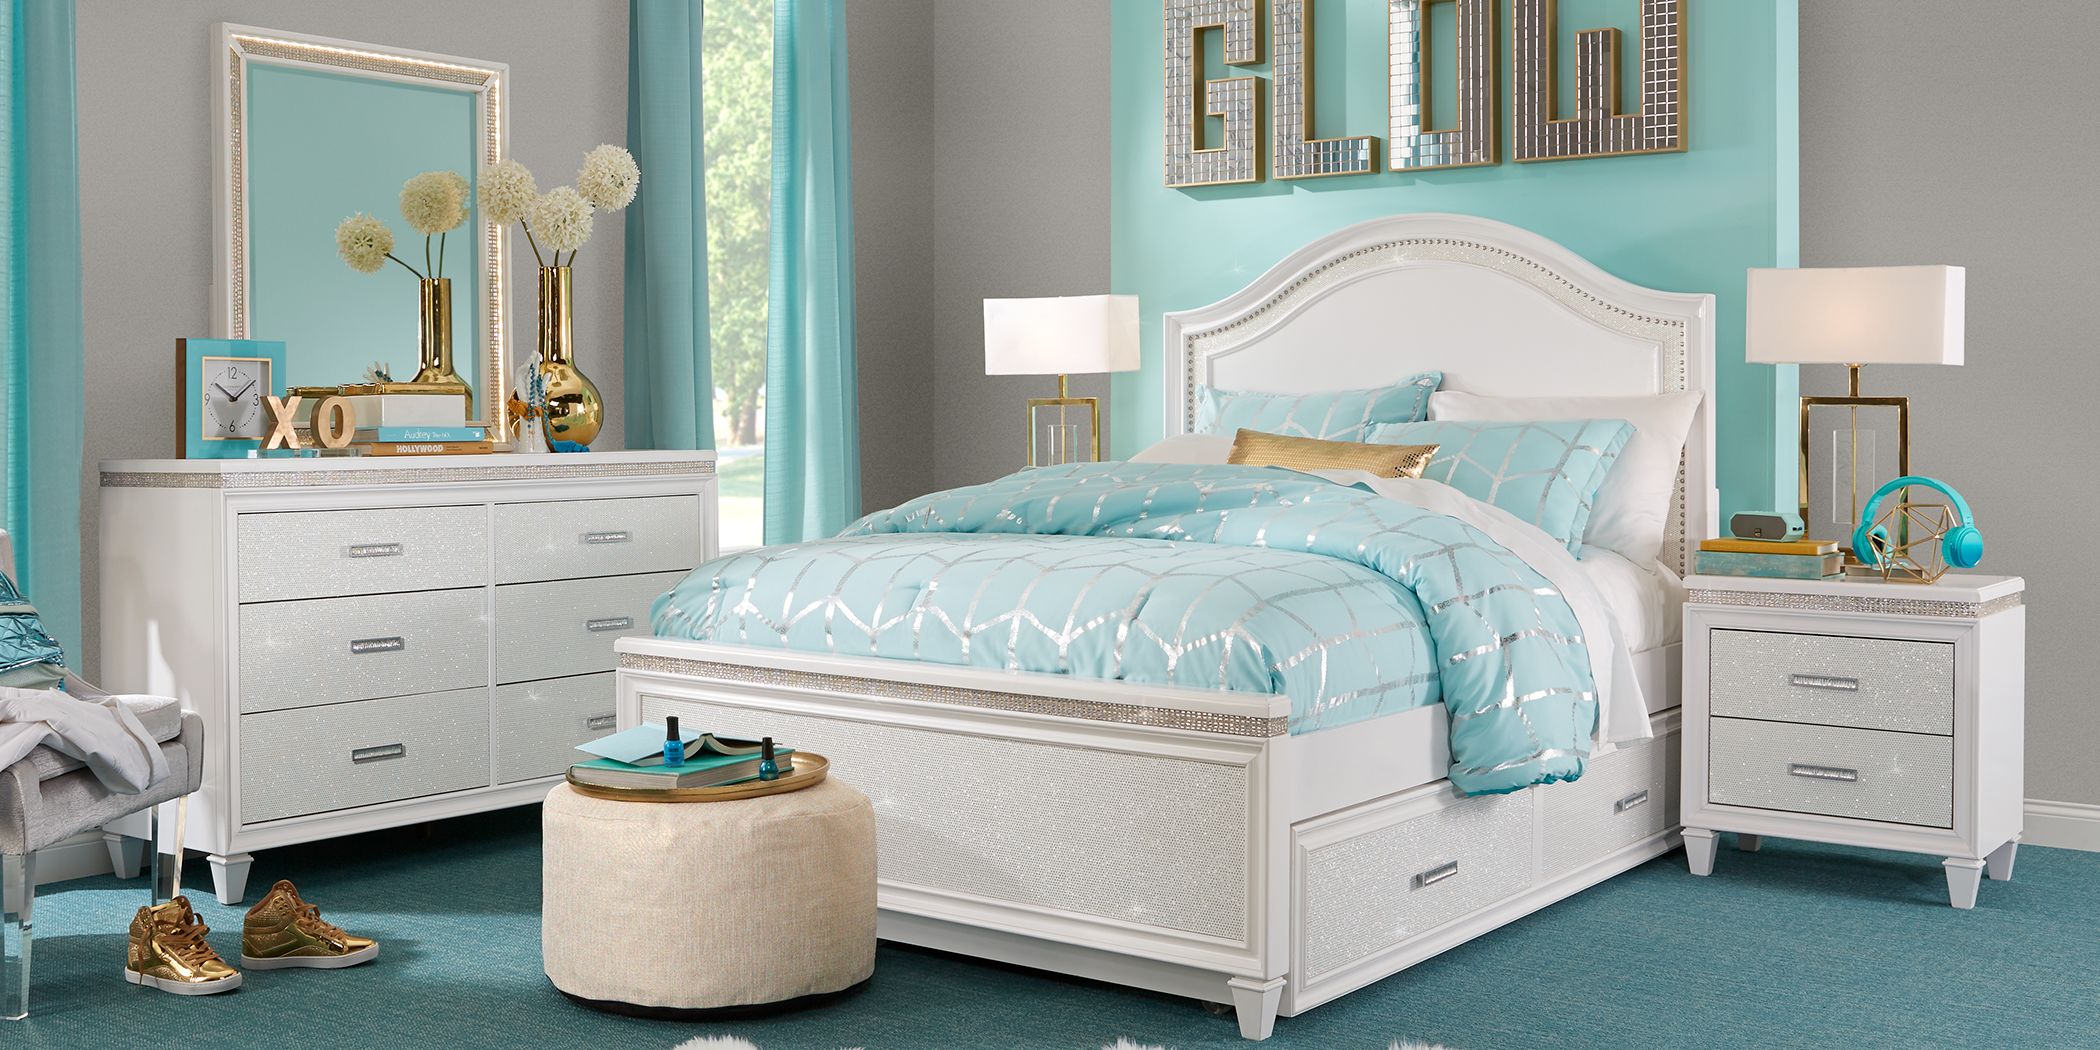 Girls Bedroom Sets,How To Choose The Right Area Rug Size